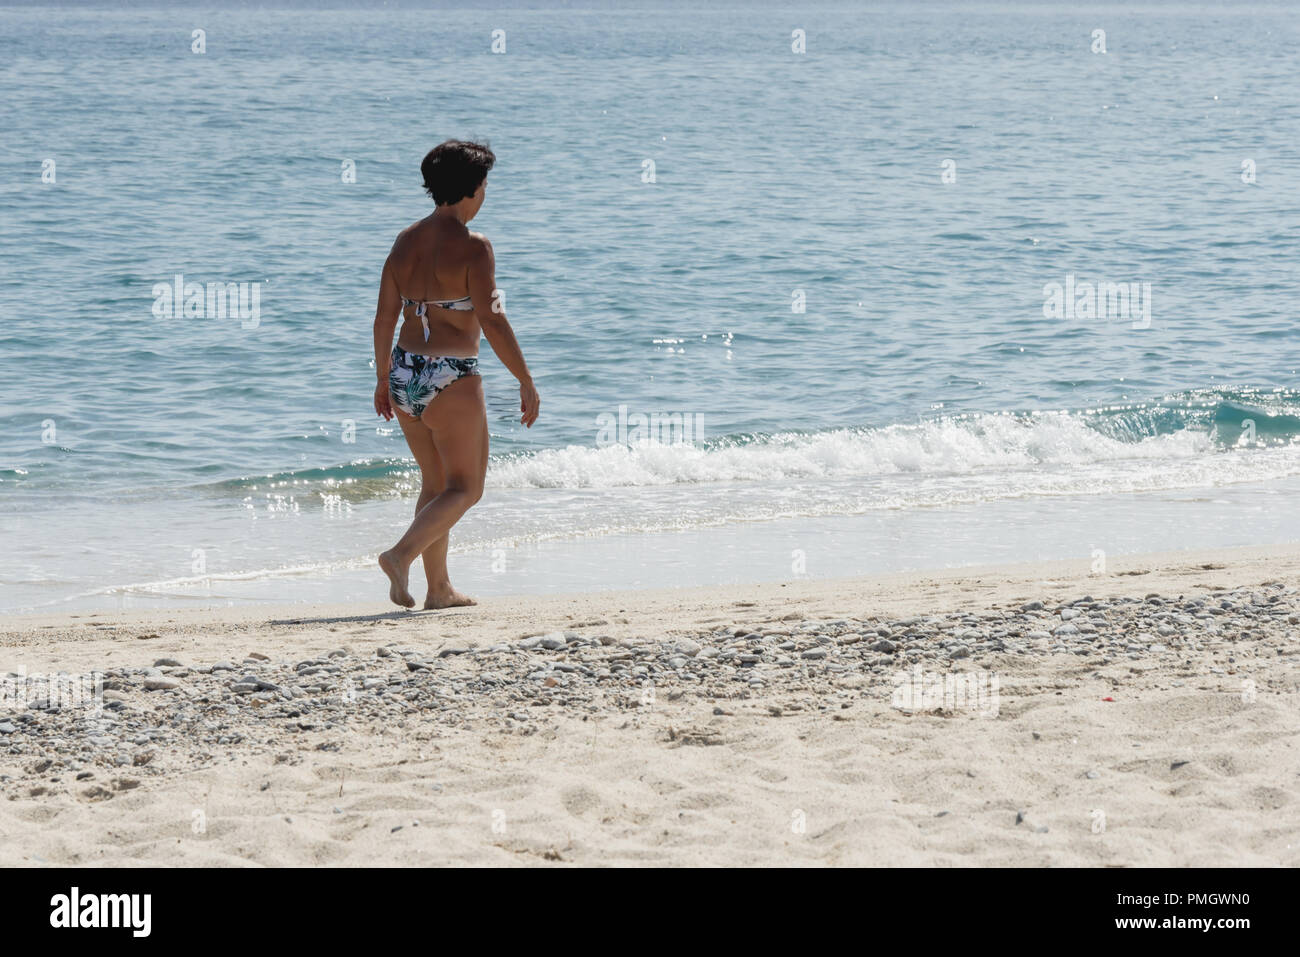 Italy Calabria Middle-aged woman at the seaside walking on the beach Stock Photo